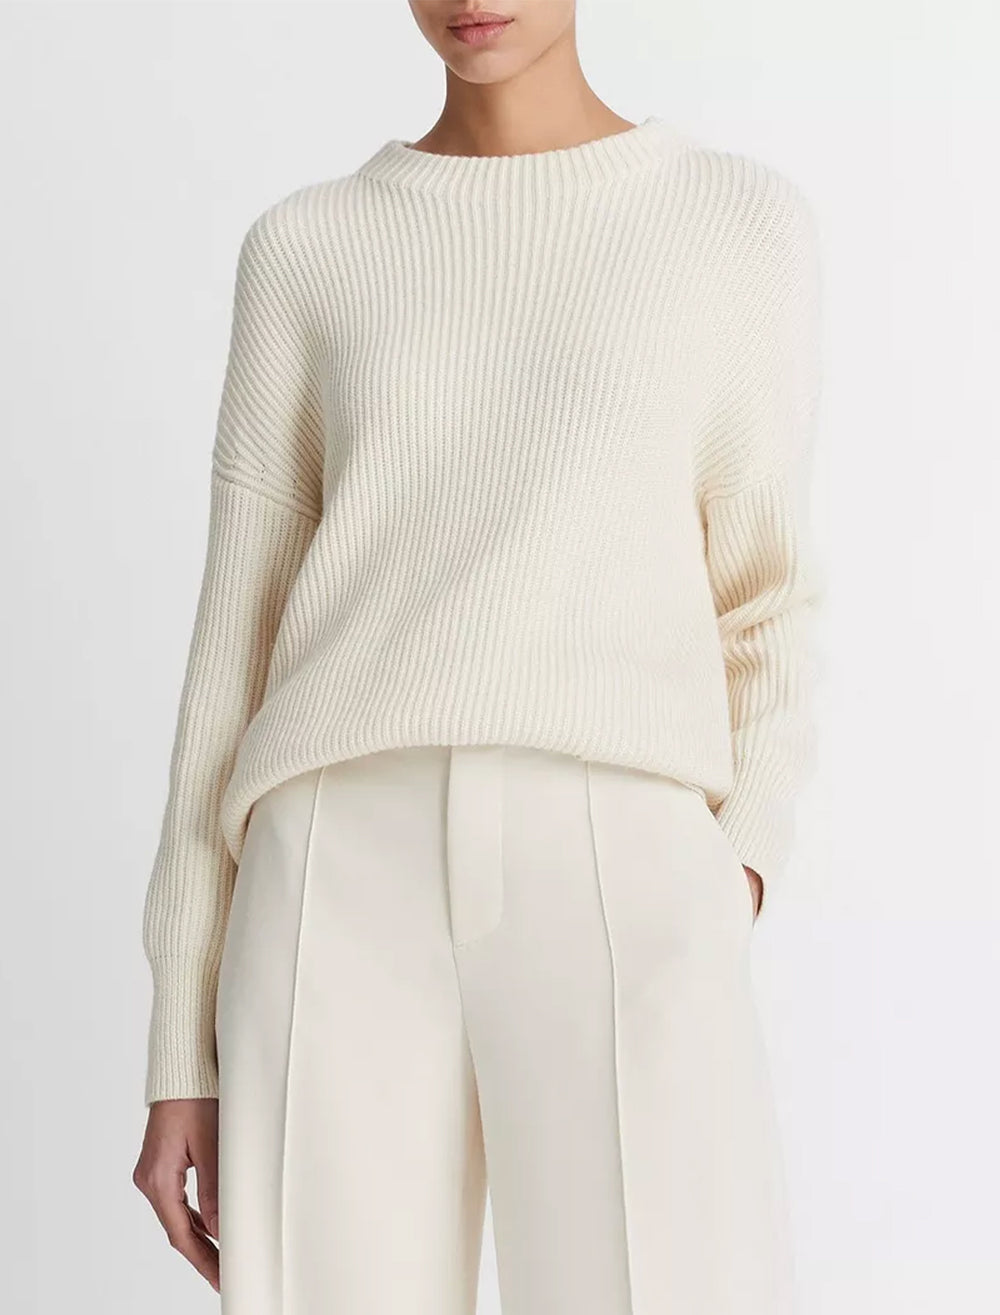 Model wearing Vince's ribbed funnel neck in ivory.